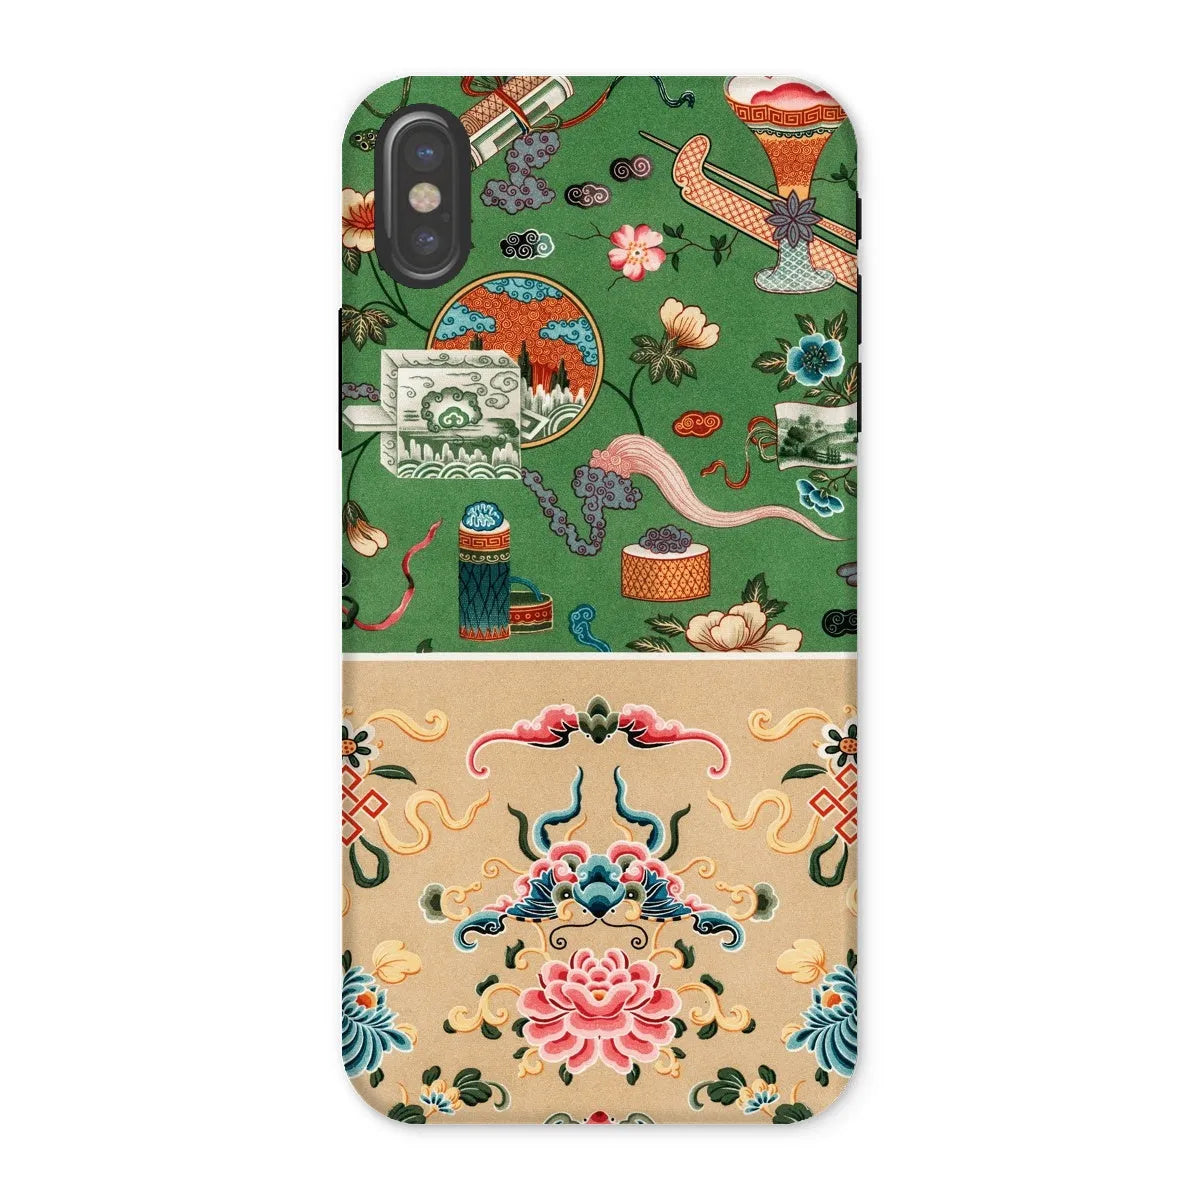 This Chinese Pattern By Auguste Racinet Tough Phone Case - Iphone x / Matte - Mobile Phone Cases - Aesthetic Art